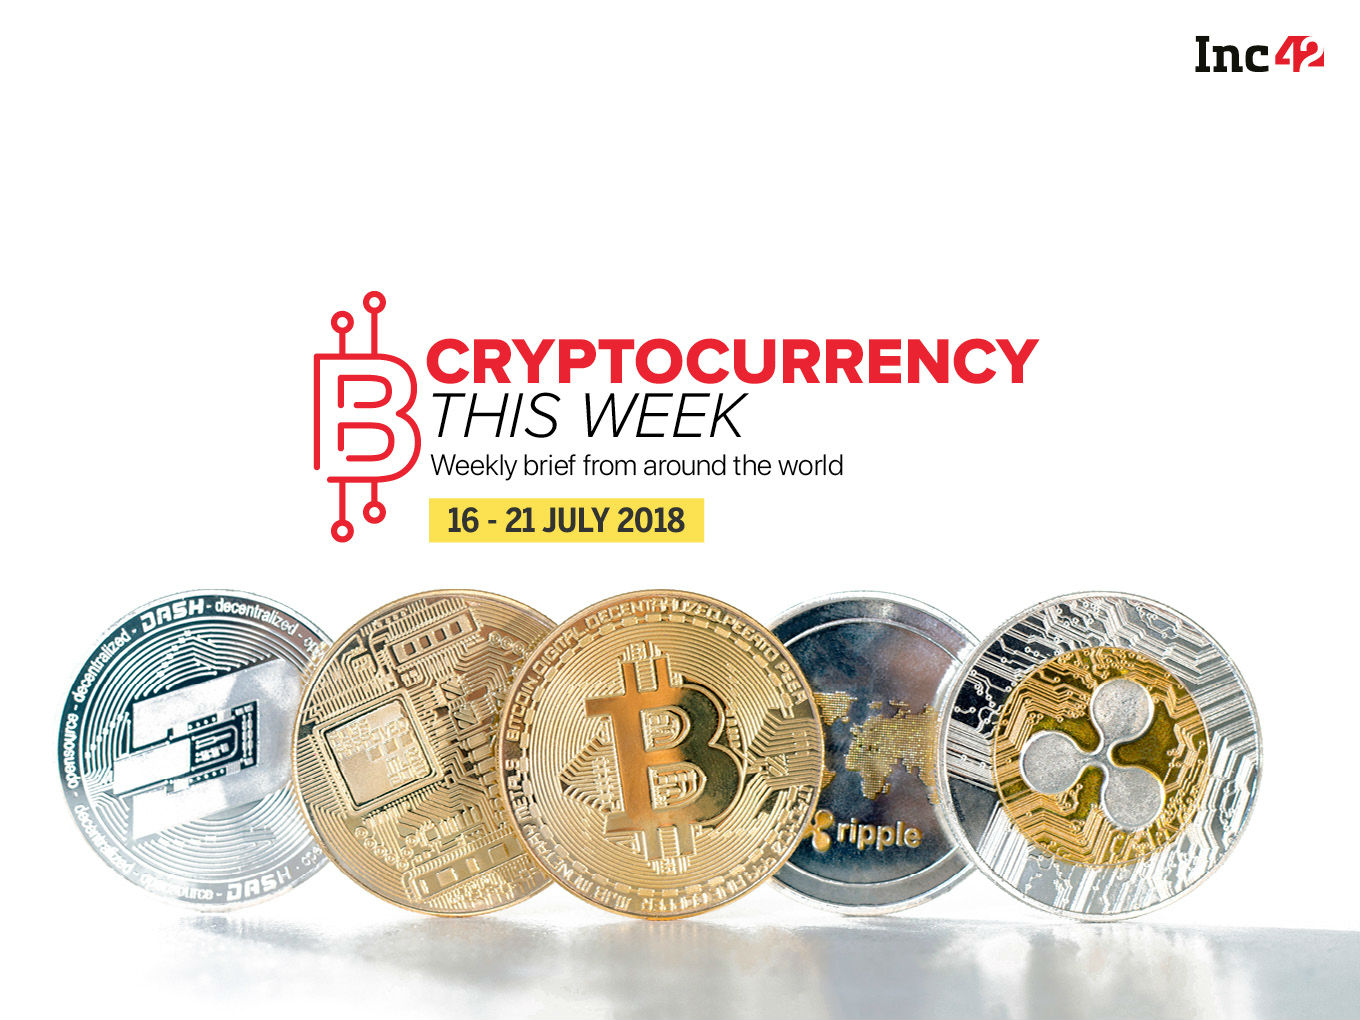 cryptocurrency-this-week-sc-sets-the-next-hearing-on-september-11-bitcoin-gains-over-1k-and-more-feature